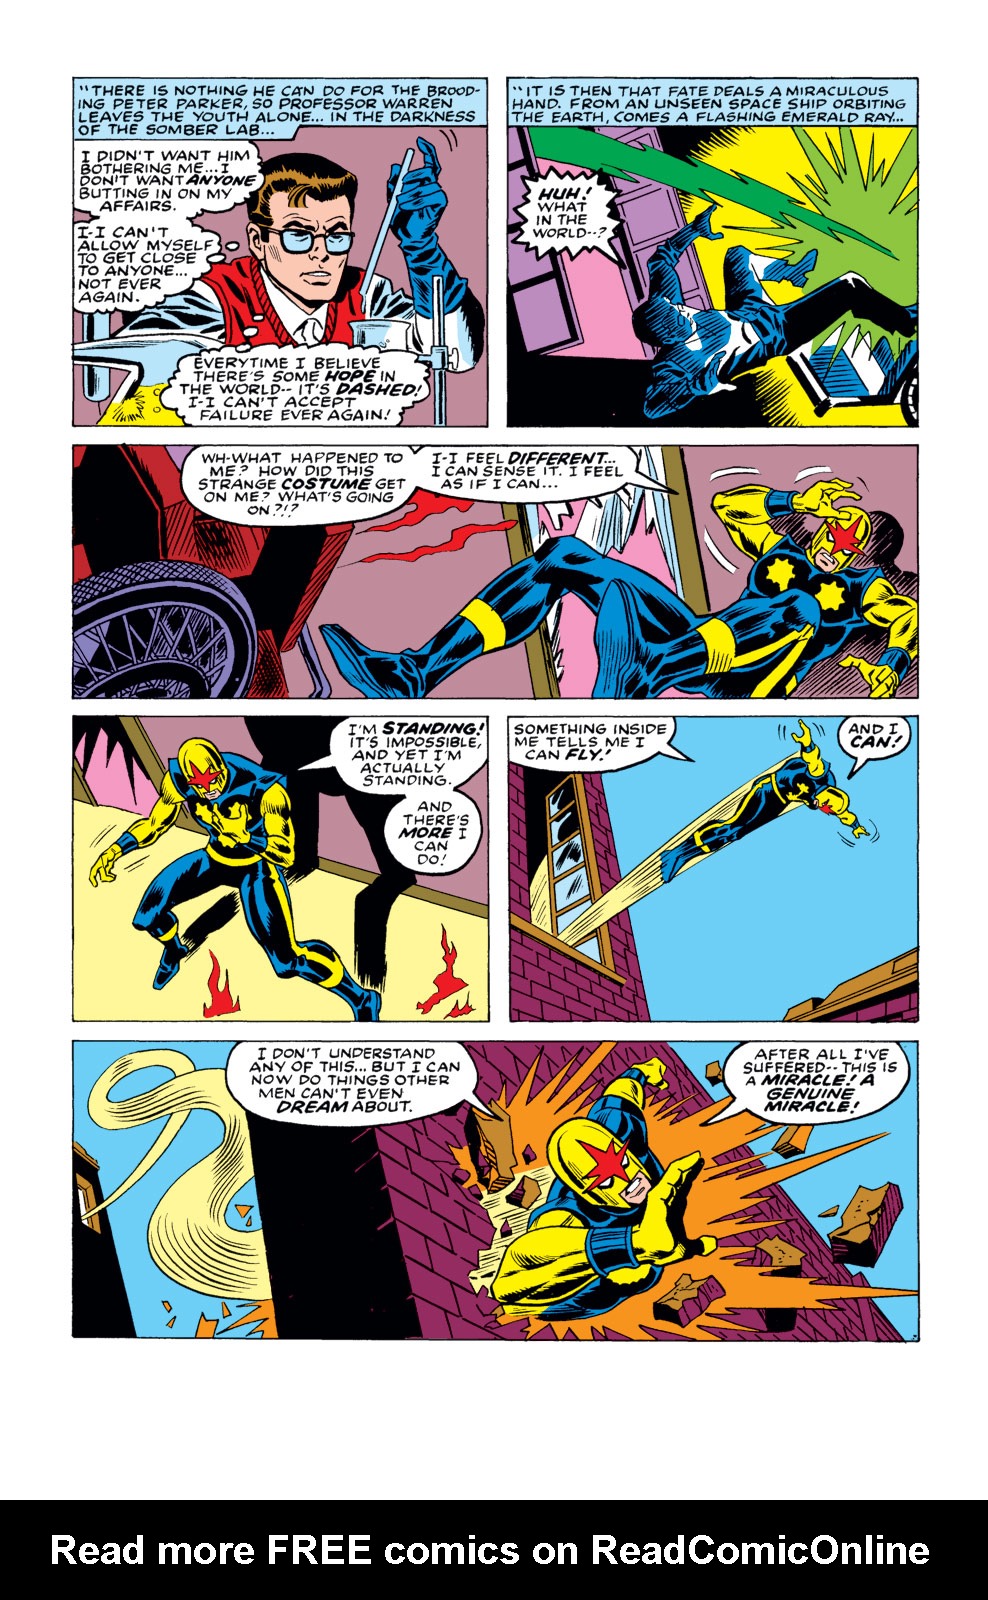 What If? (1977) issue 15 - Nova had been four other people - Page 24